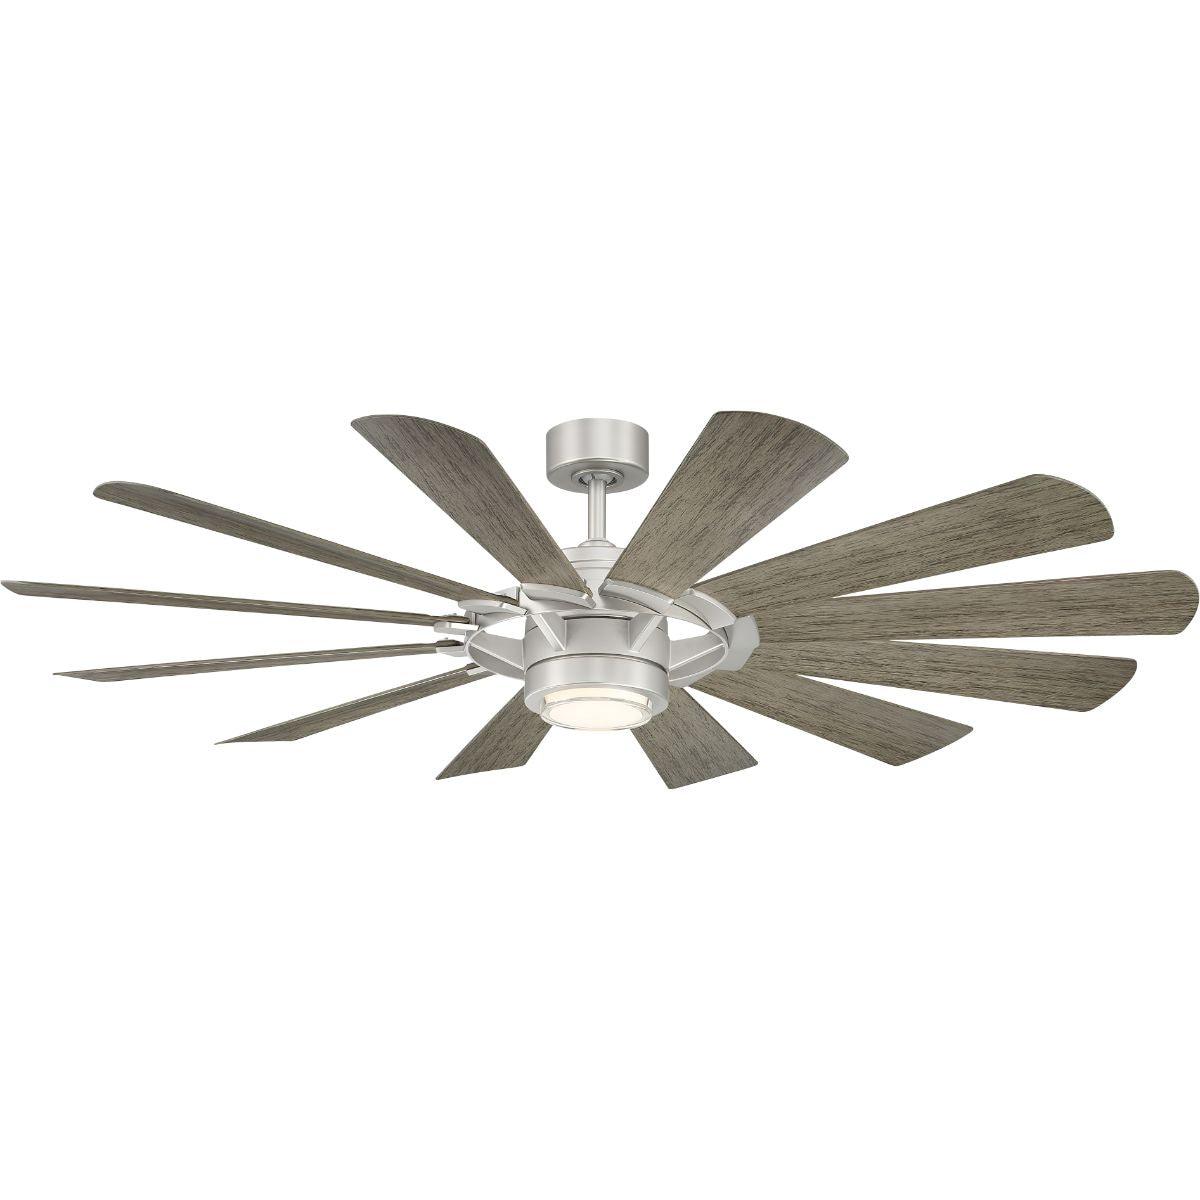 Wyndmill 65 Inch Windmill Outdoor Smart Ceiling Fan With 2700K Light And Remote